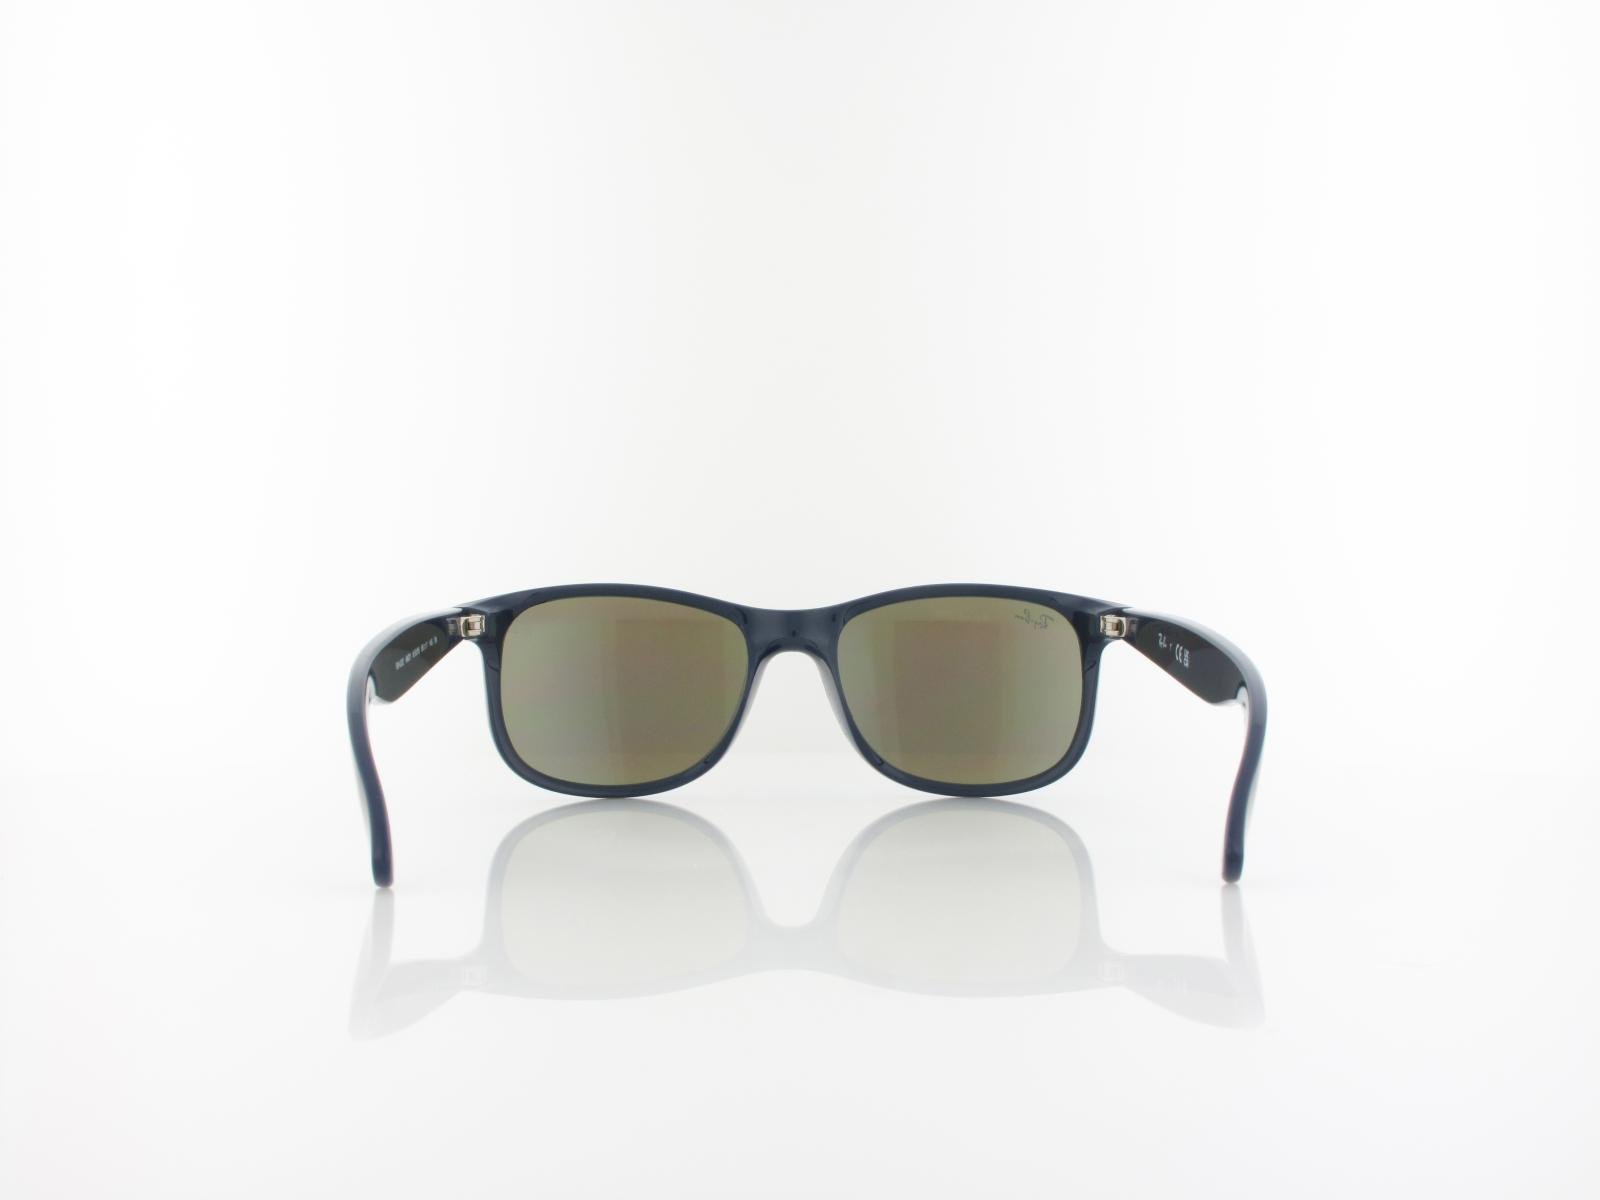 Ray Ban | Andy RB4202 615355 55 | shiny blue on matte top / green mirror blue